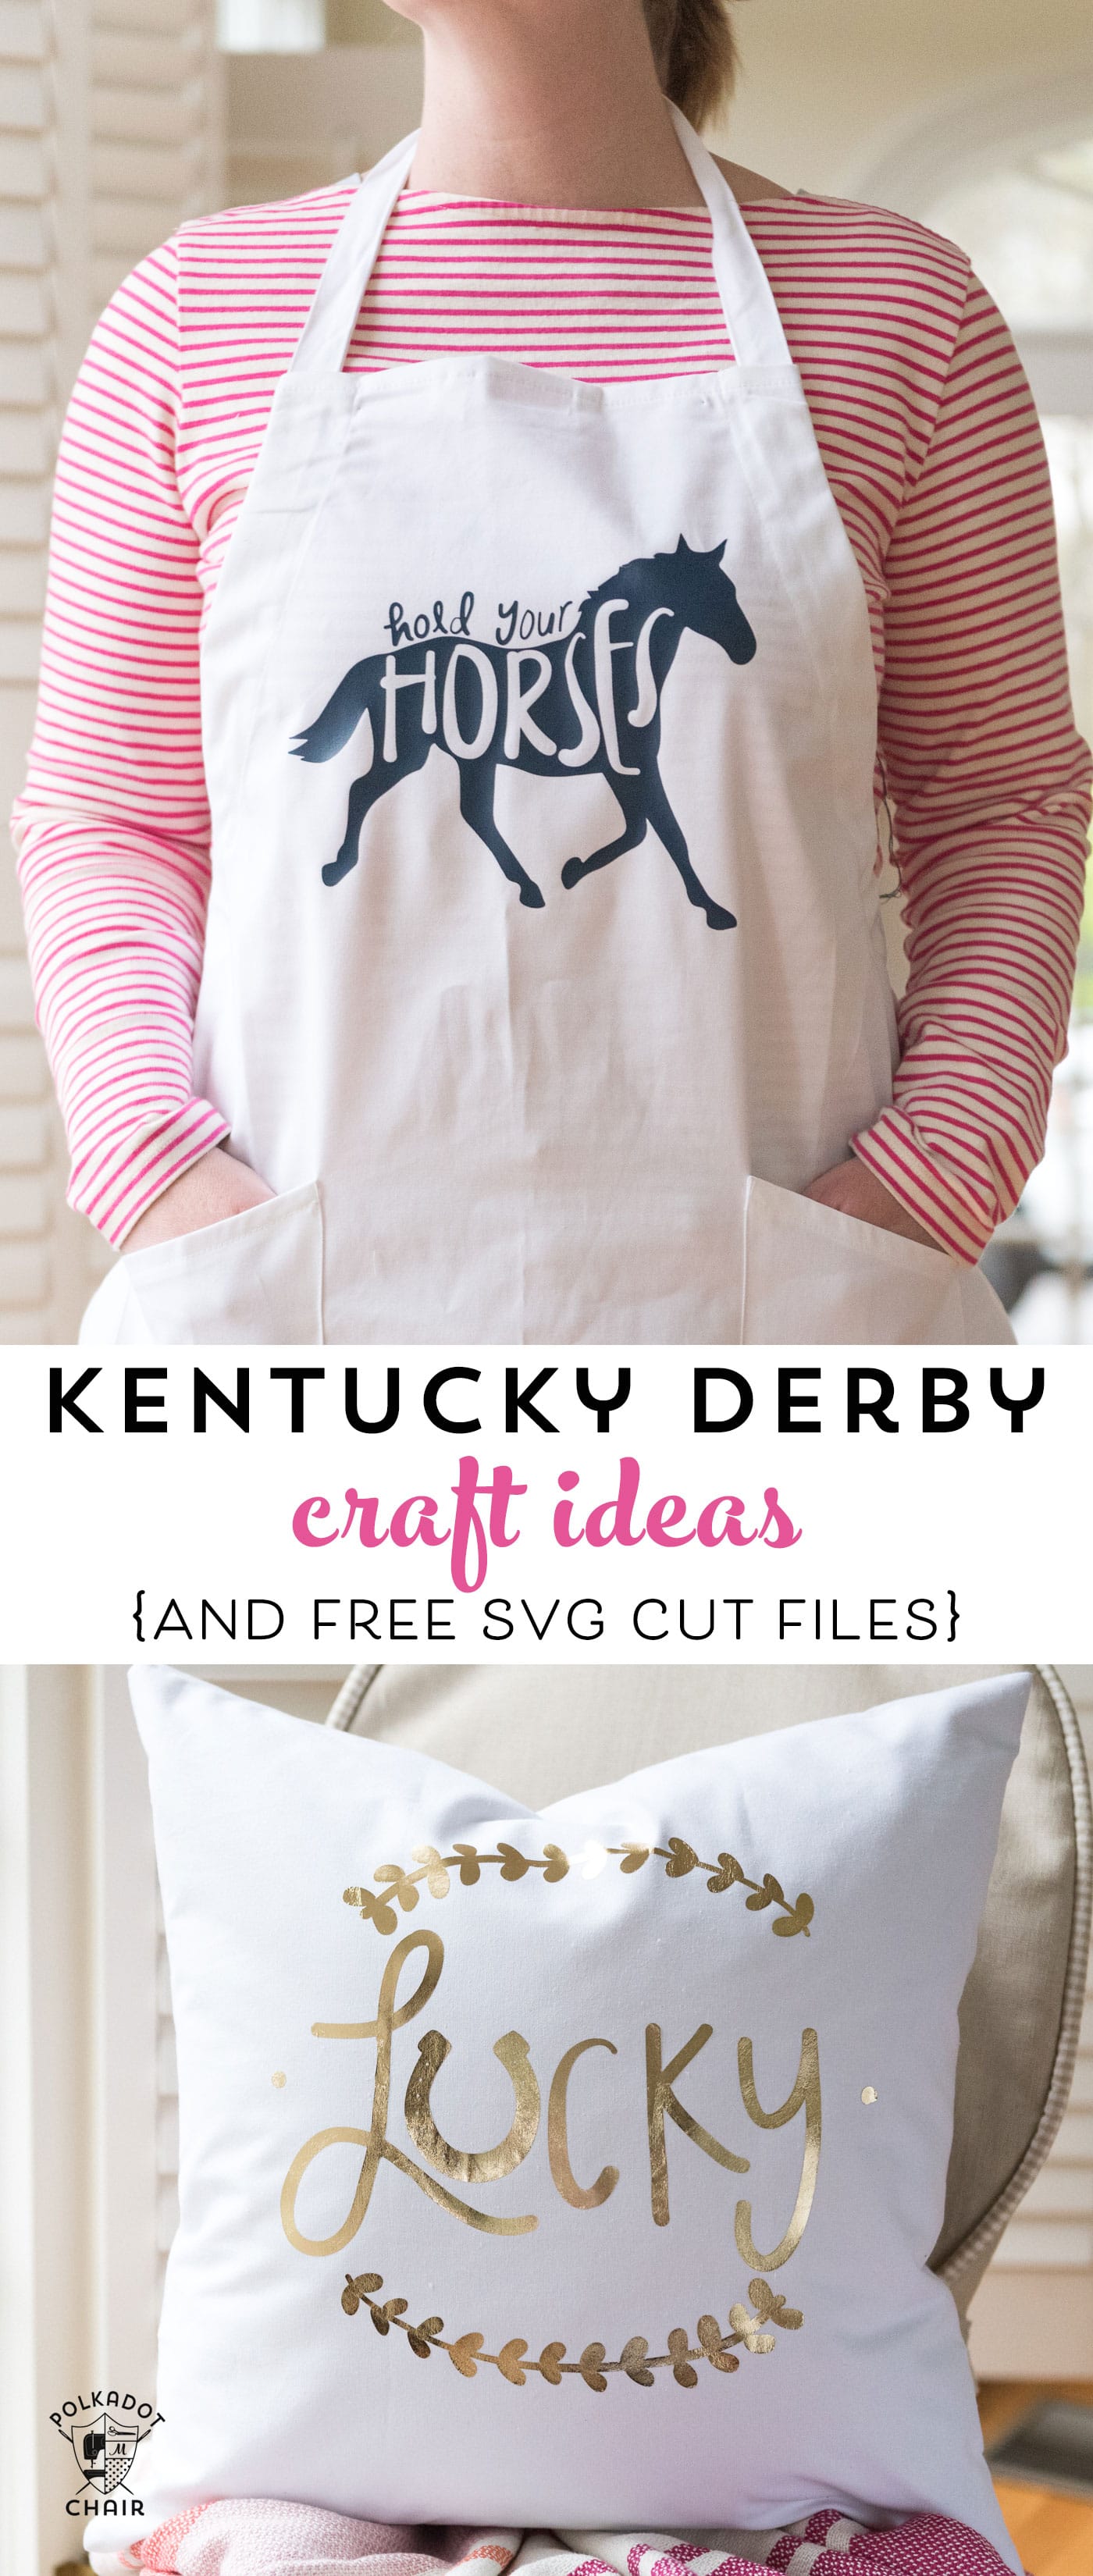 Download Kentucky Derby Craft Ideas and SVG Files - The Polka Dot Chair